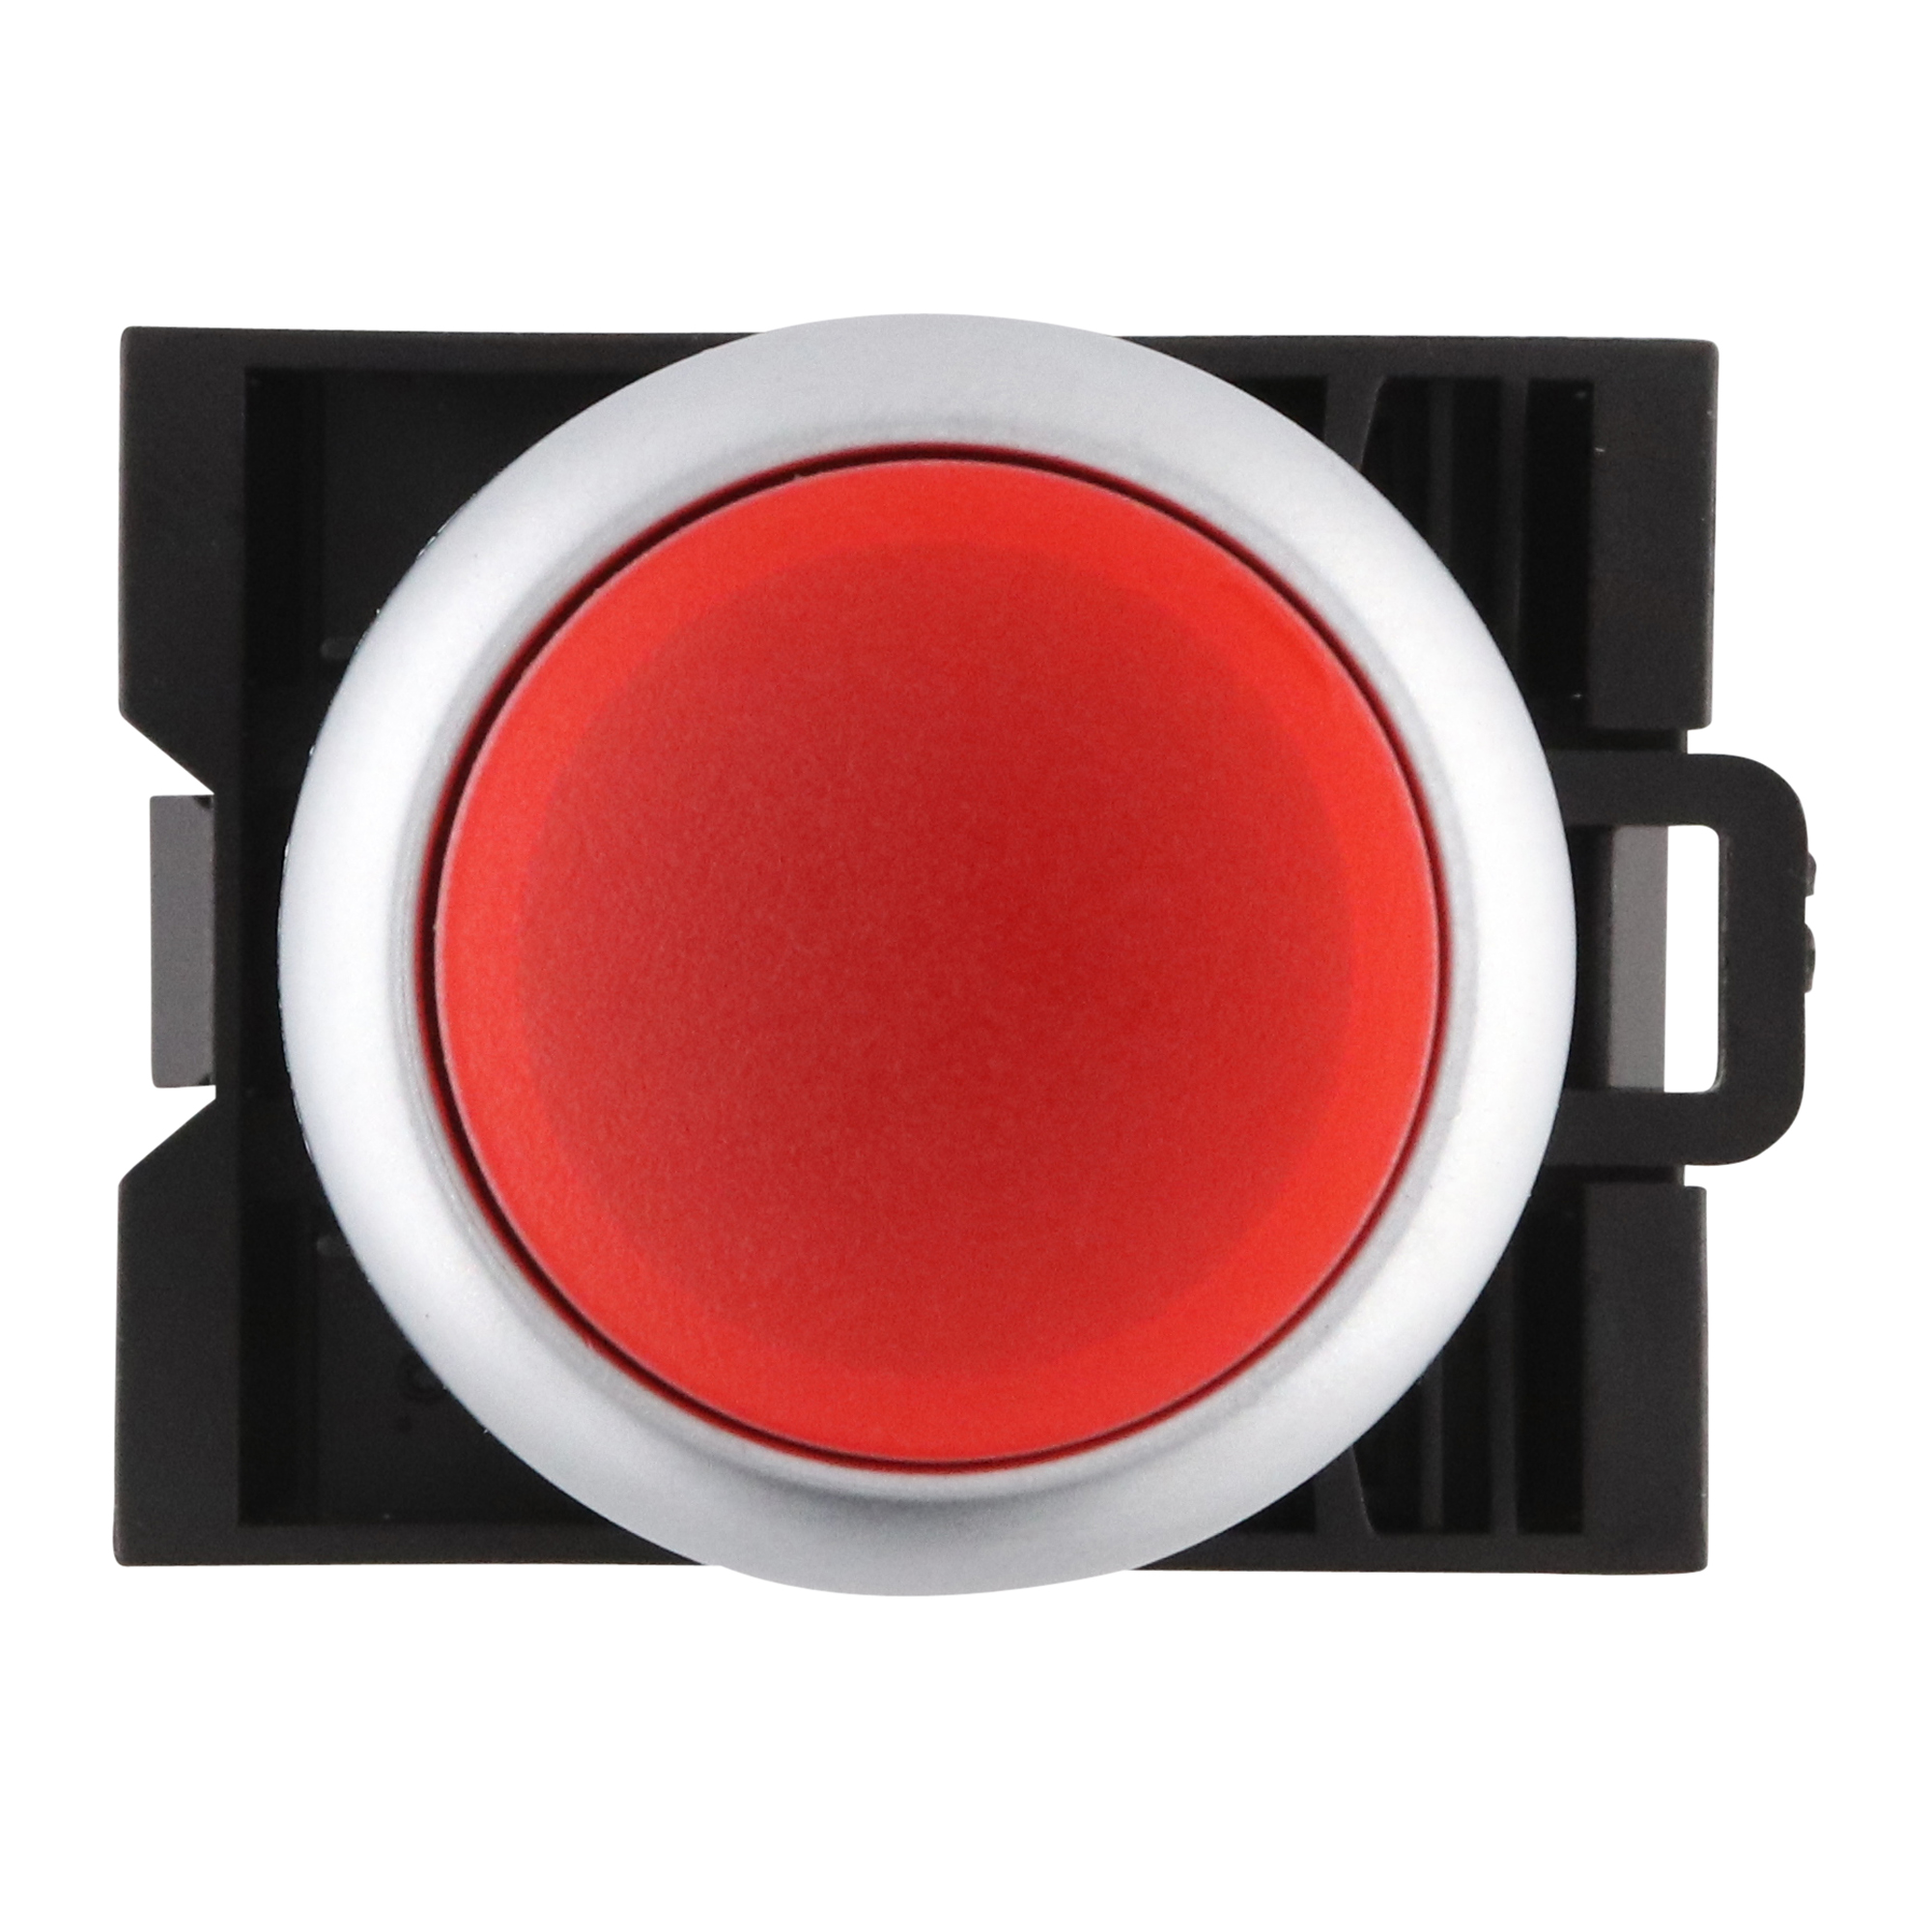 EATON MOELLER M22-DLH-R/K11/R Industrial Pushbutton Switch, Momentary Spring Return, Red, M22 Series, Round, SPST-NC, SPST-NO - image 2 of 4